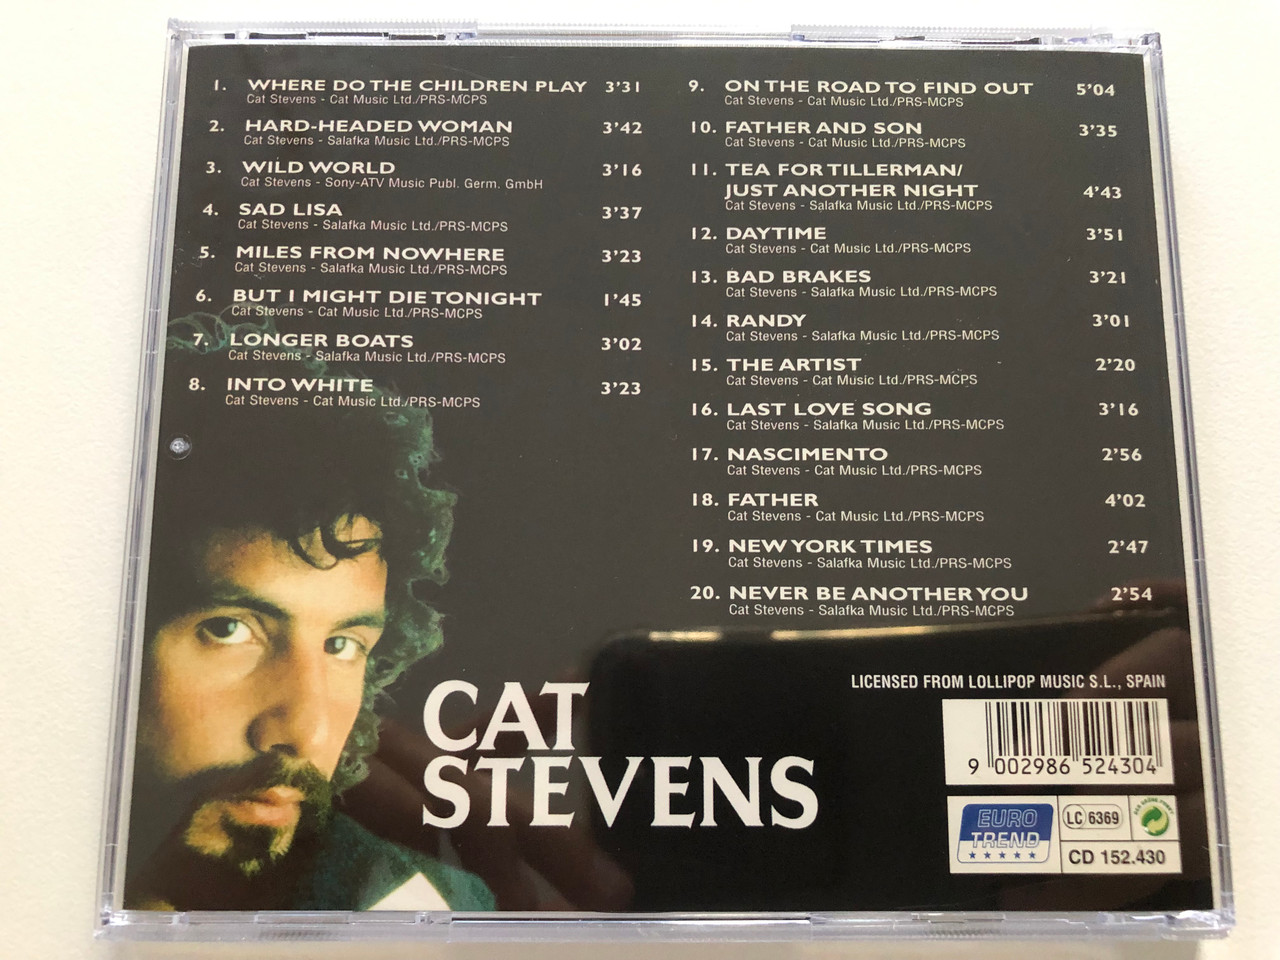 https://cdn10.bigcommerce.com/s-62bdpkt7pb/products/30926/images/182375/Cat_Stevens_Where_Do_The_Children_Play_Father_And_Son_Wild_World_Sad_Lisa_Greatest_Hits_Eurotrend_Audio_CD_Stereo_CD_152_4__59497.1624471255.1280.1280.JPG?c=2